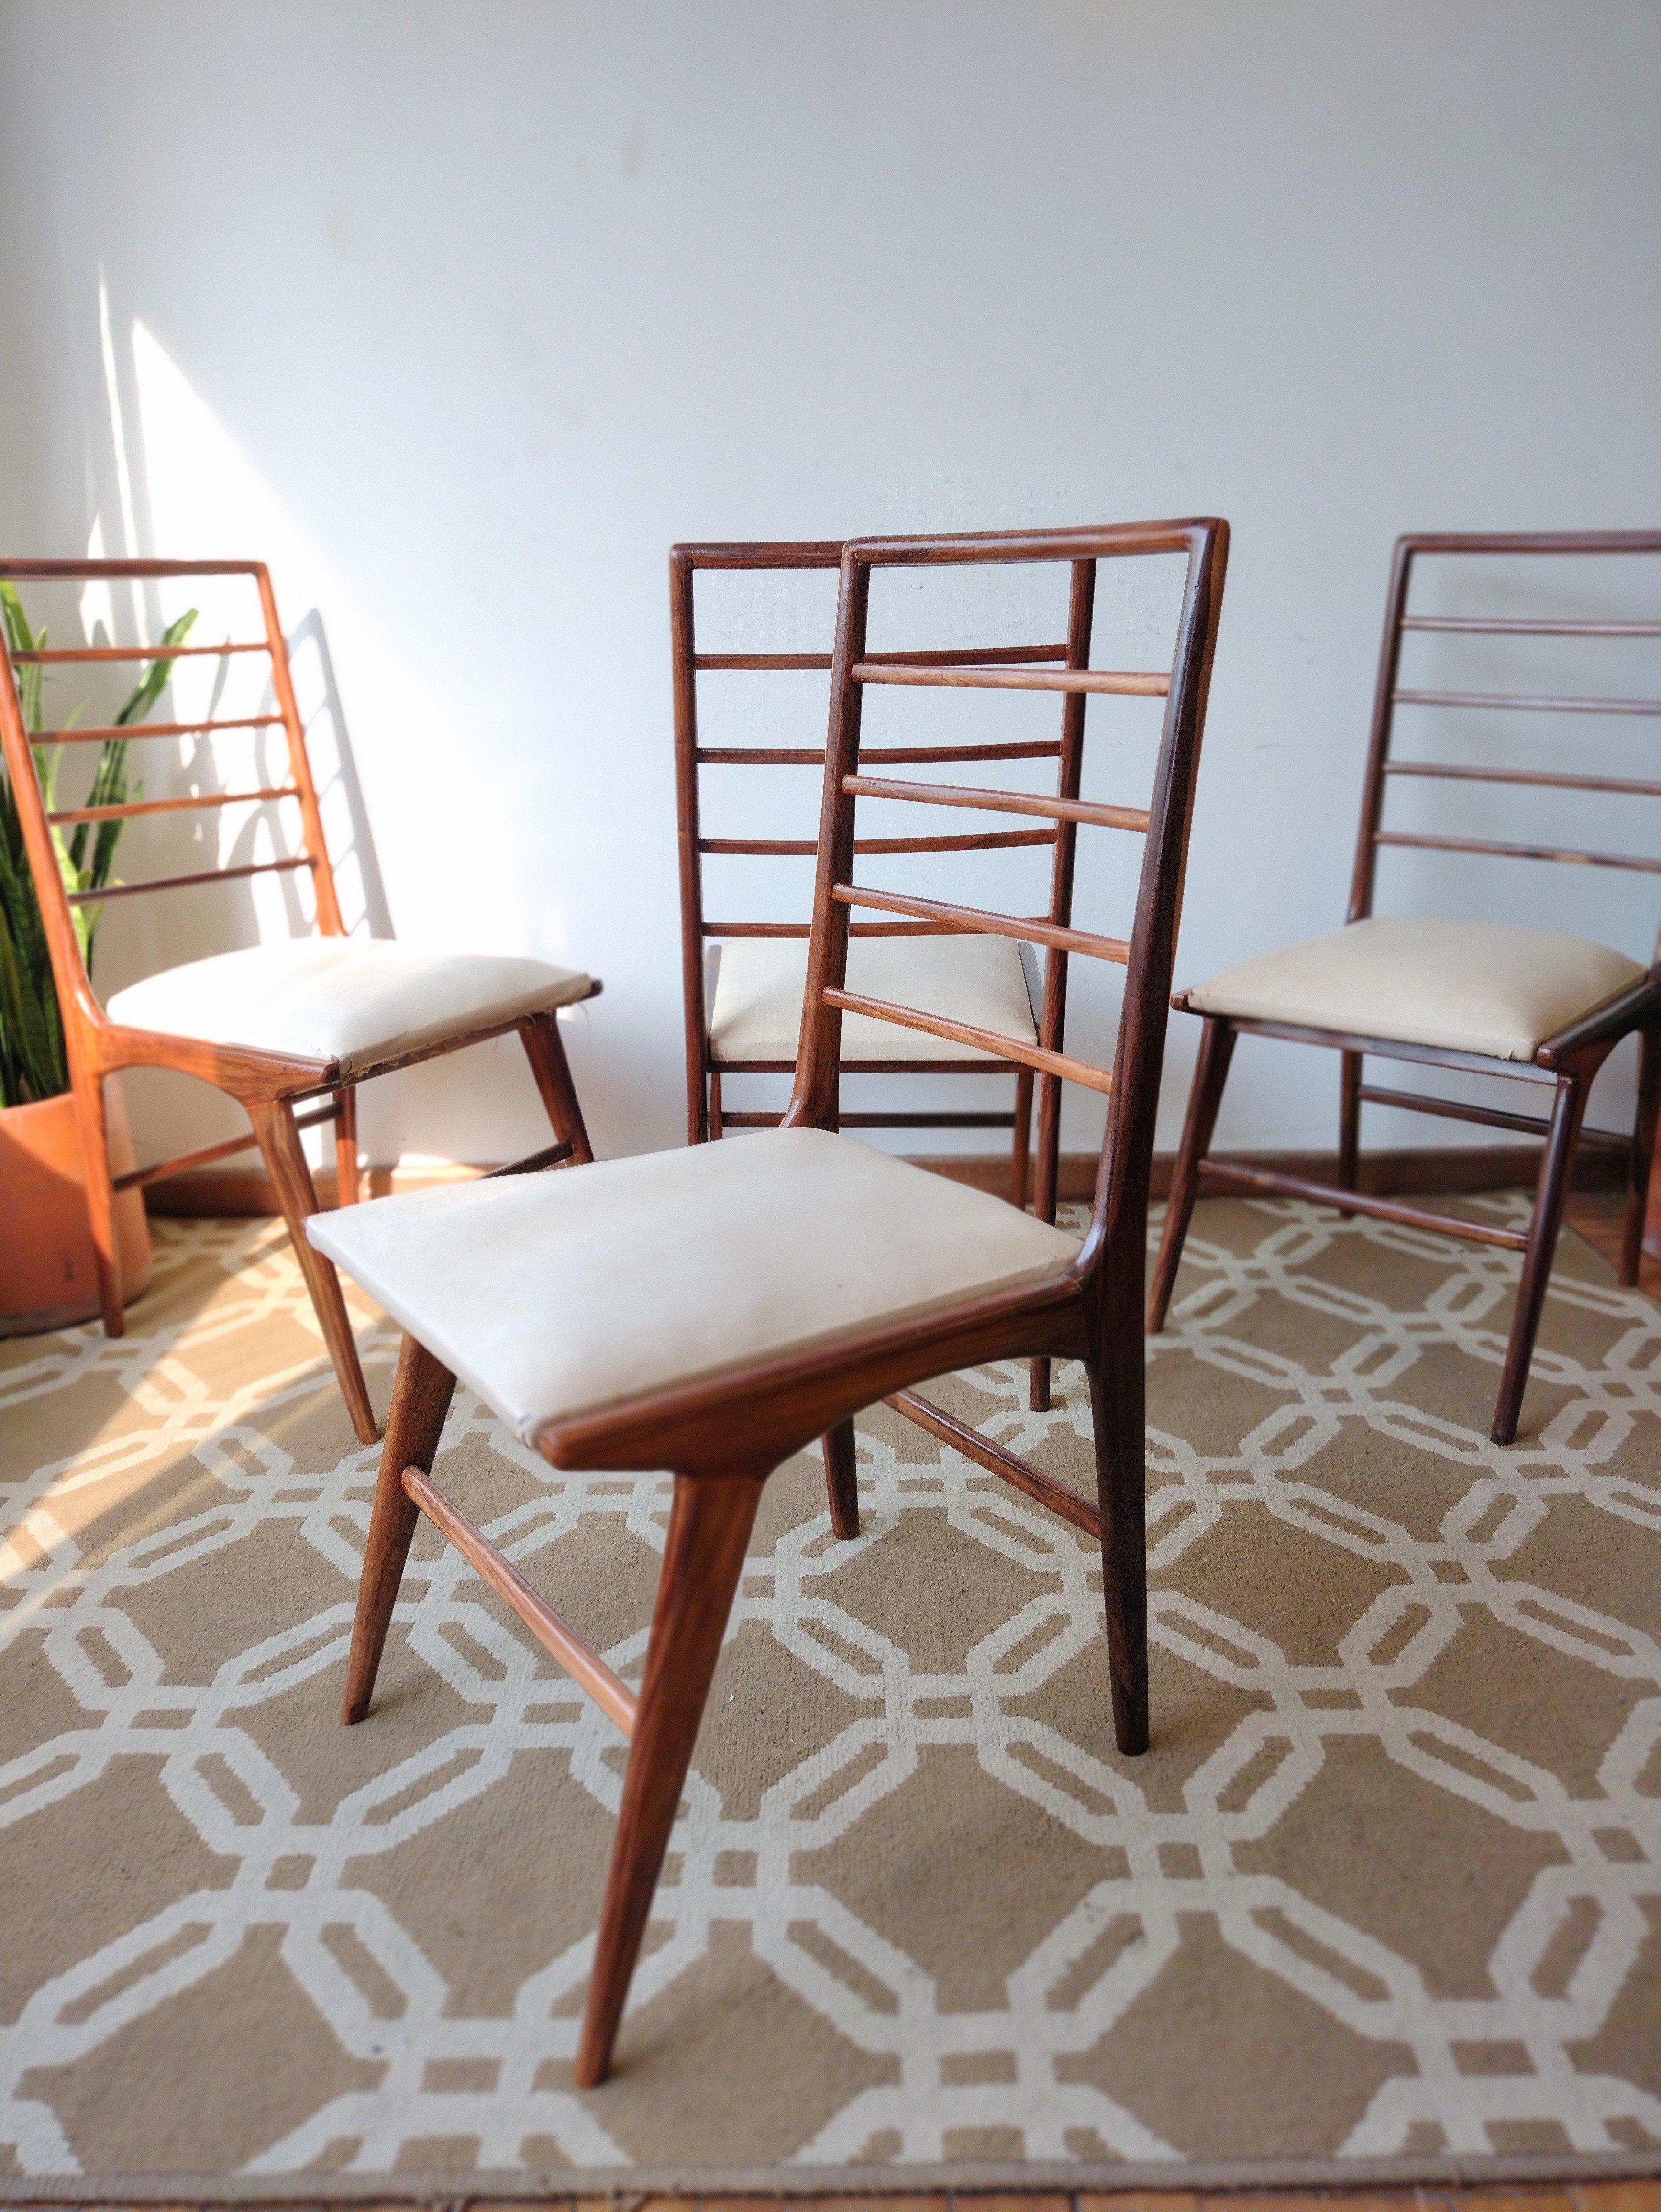 Set of 4 Mid-Century Modern Brazilian chairs with structure in noble solid wood (recently refinished) and a seat with springs covered with original offwhite courvin (faux leather). Firm structure. Overall great condition with only minor age